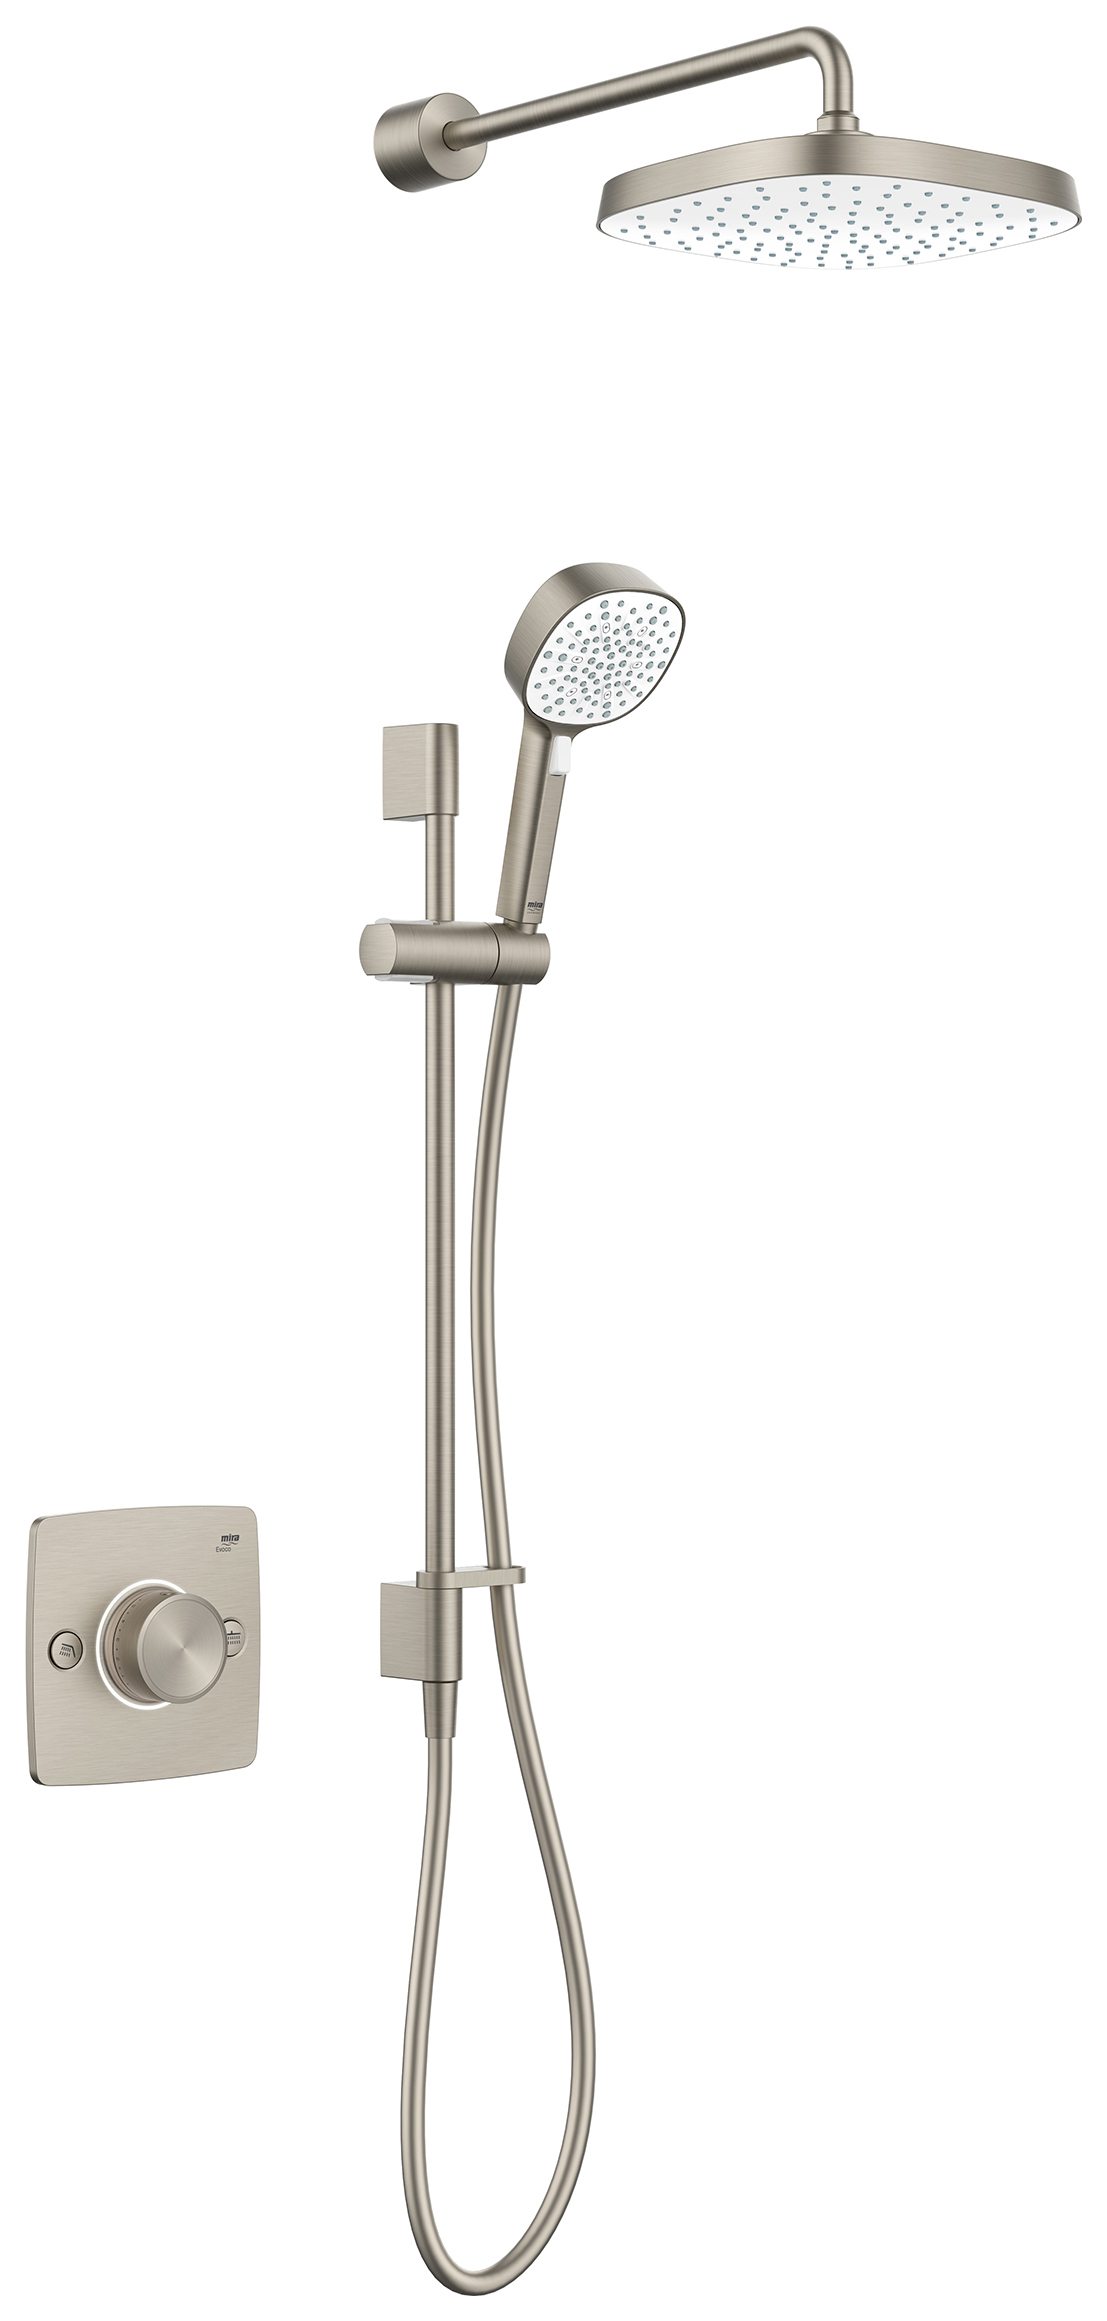 Image of Mira Evoco Dual Outlet Thermostatic Mixer Shower with HydroGlo Technology - Brushed Nickel